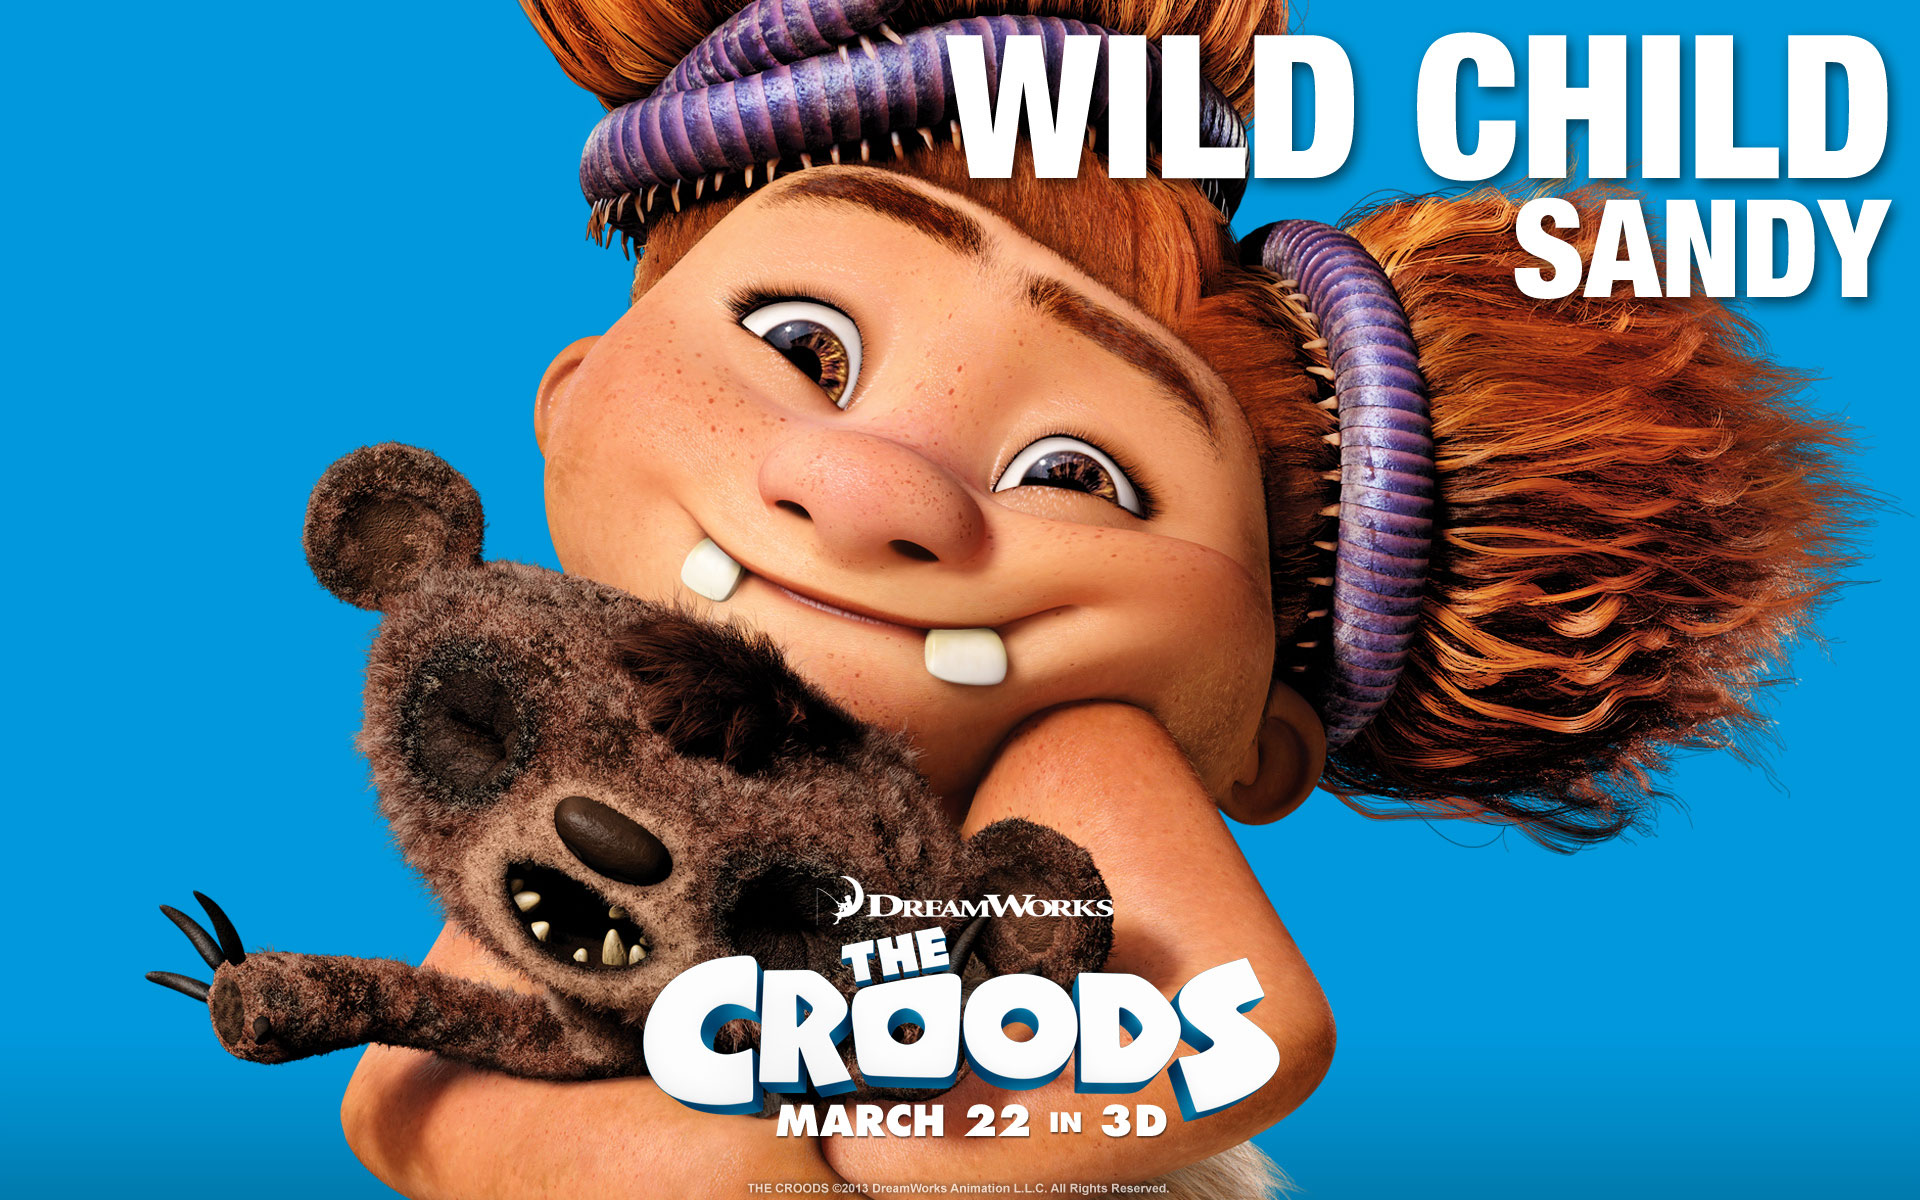 The Croods wallpaper 3